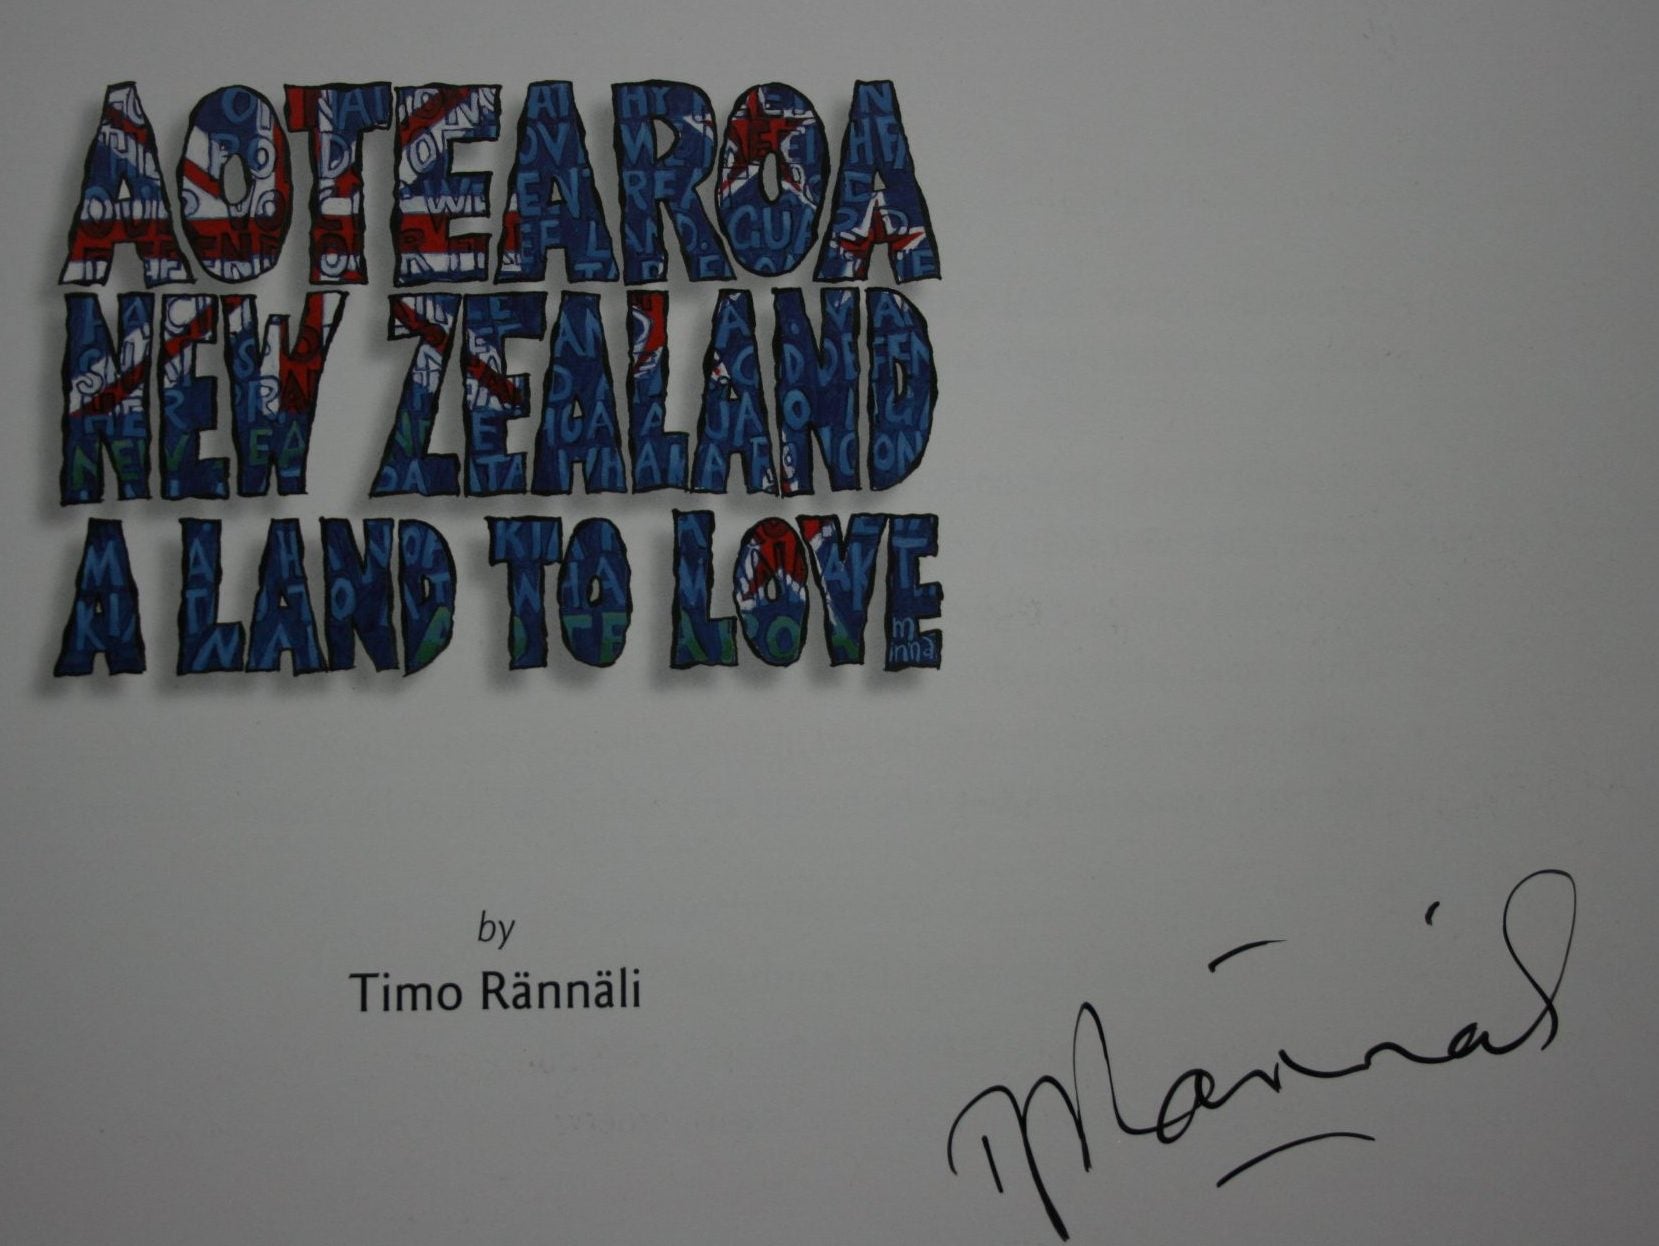 Aotearoa New Zealand A Land to Love By Timo Rannali. SIGNED BY AUTHOR/ARTIST. VERY SCARCE SIGNED COPY.